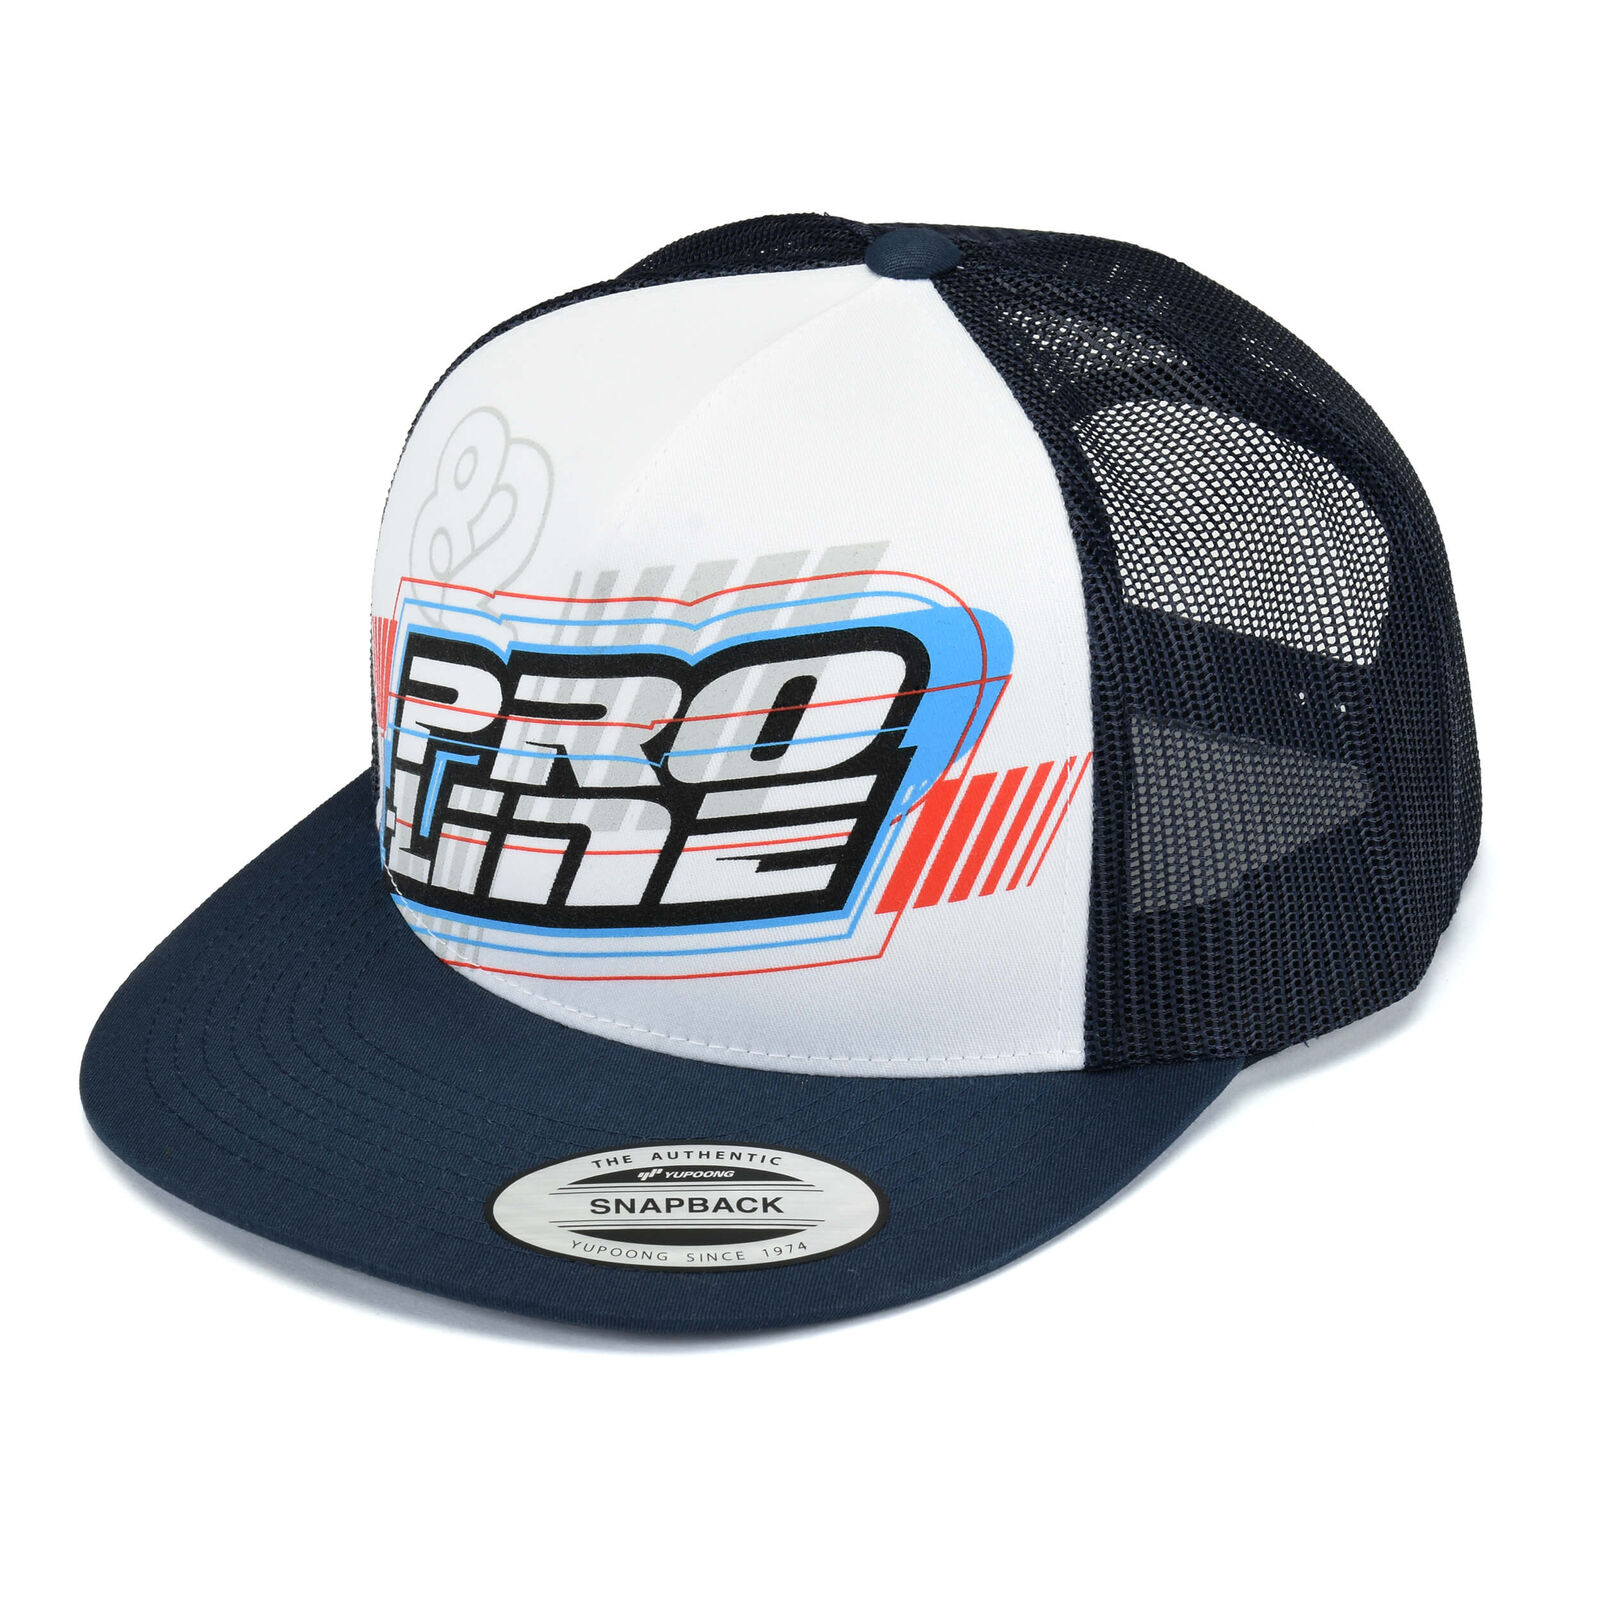 Pro-Line Energy Trucker Snap Back Hat (One Size Fits Most)